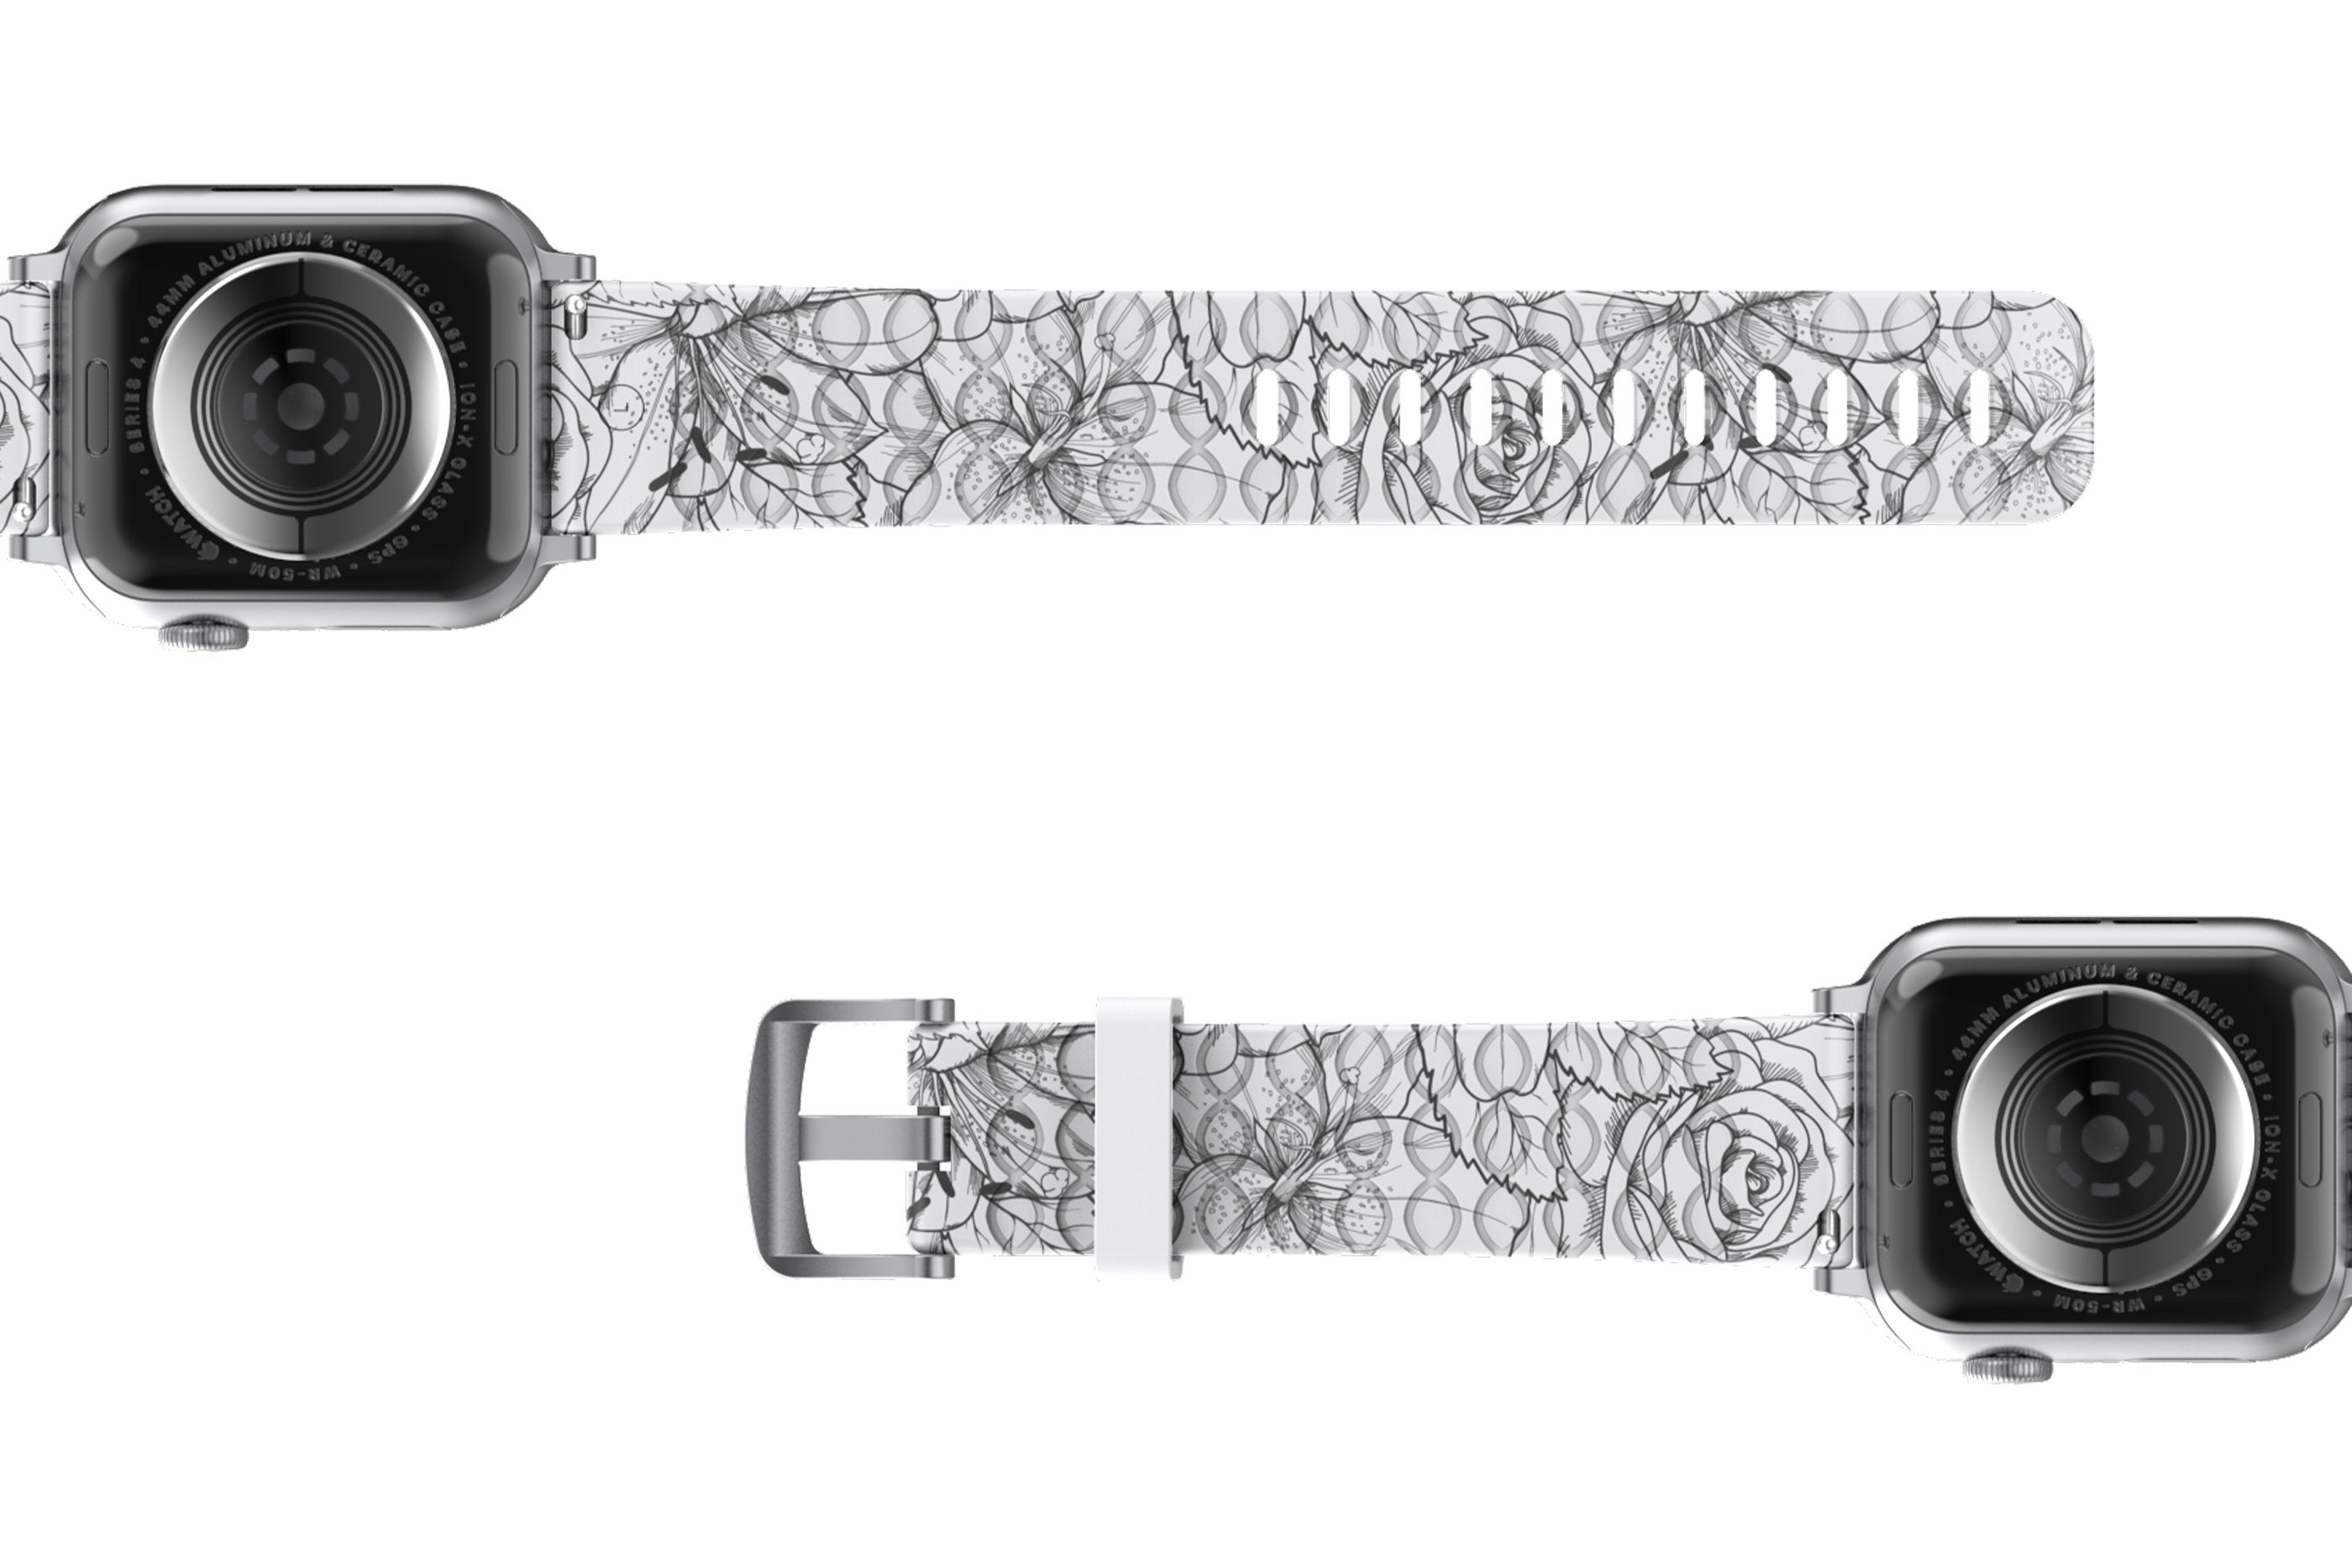 Winter Rose Apple Watch Band with Silver hardware viewed bottom up